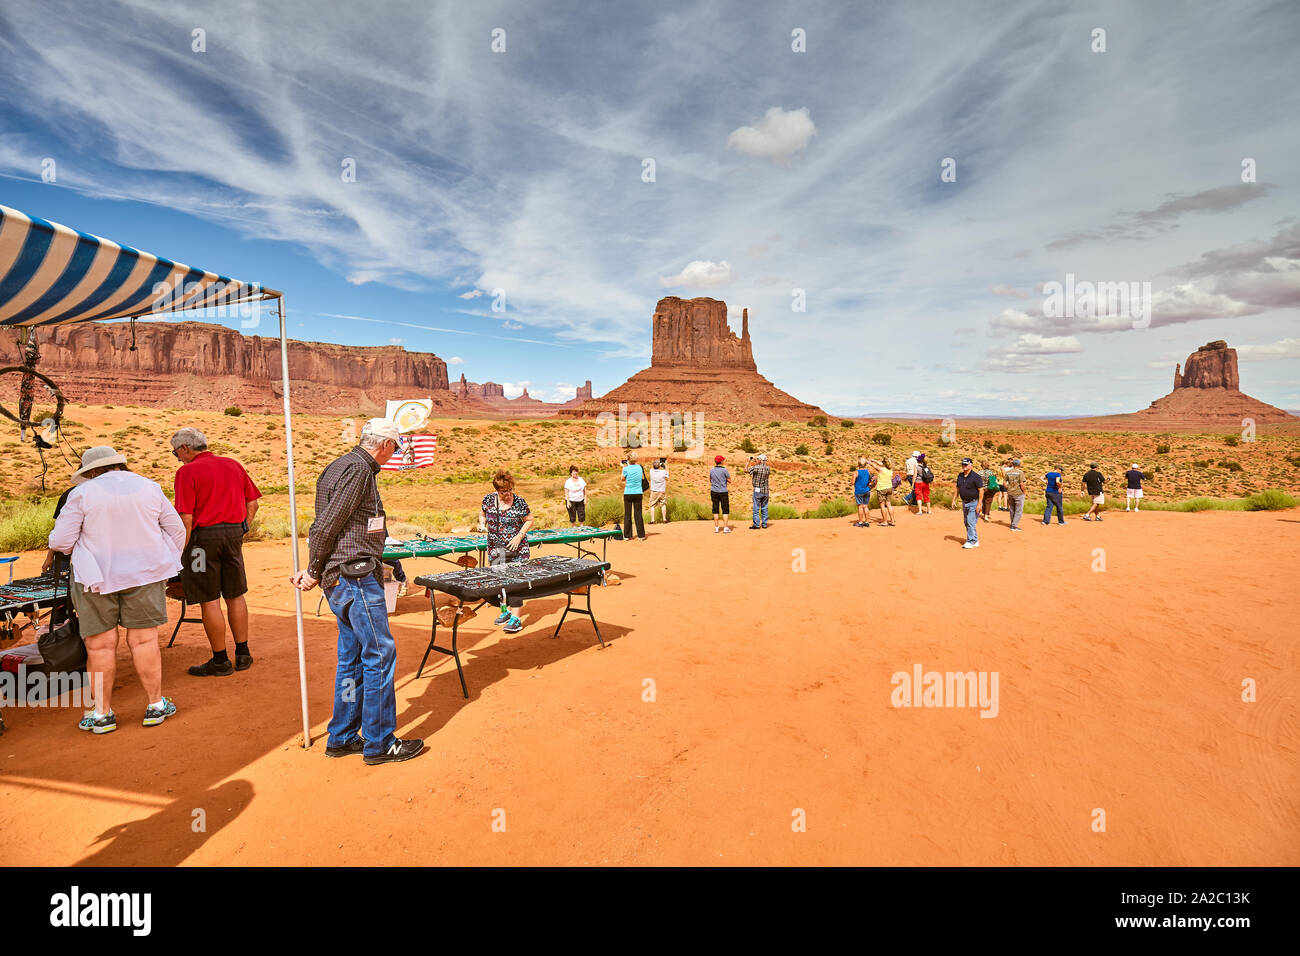 Utah, USA - September 07, 2015: Tourists at Navajo souvenir stall with Native American handcraft in Monument Valley. Stock Photo